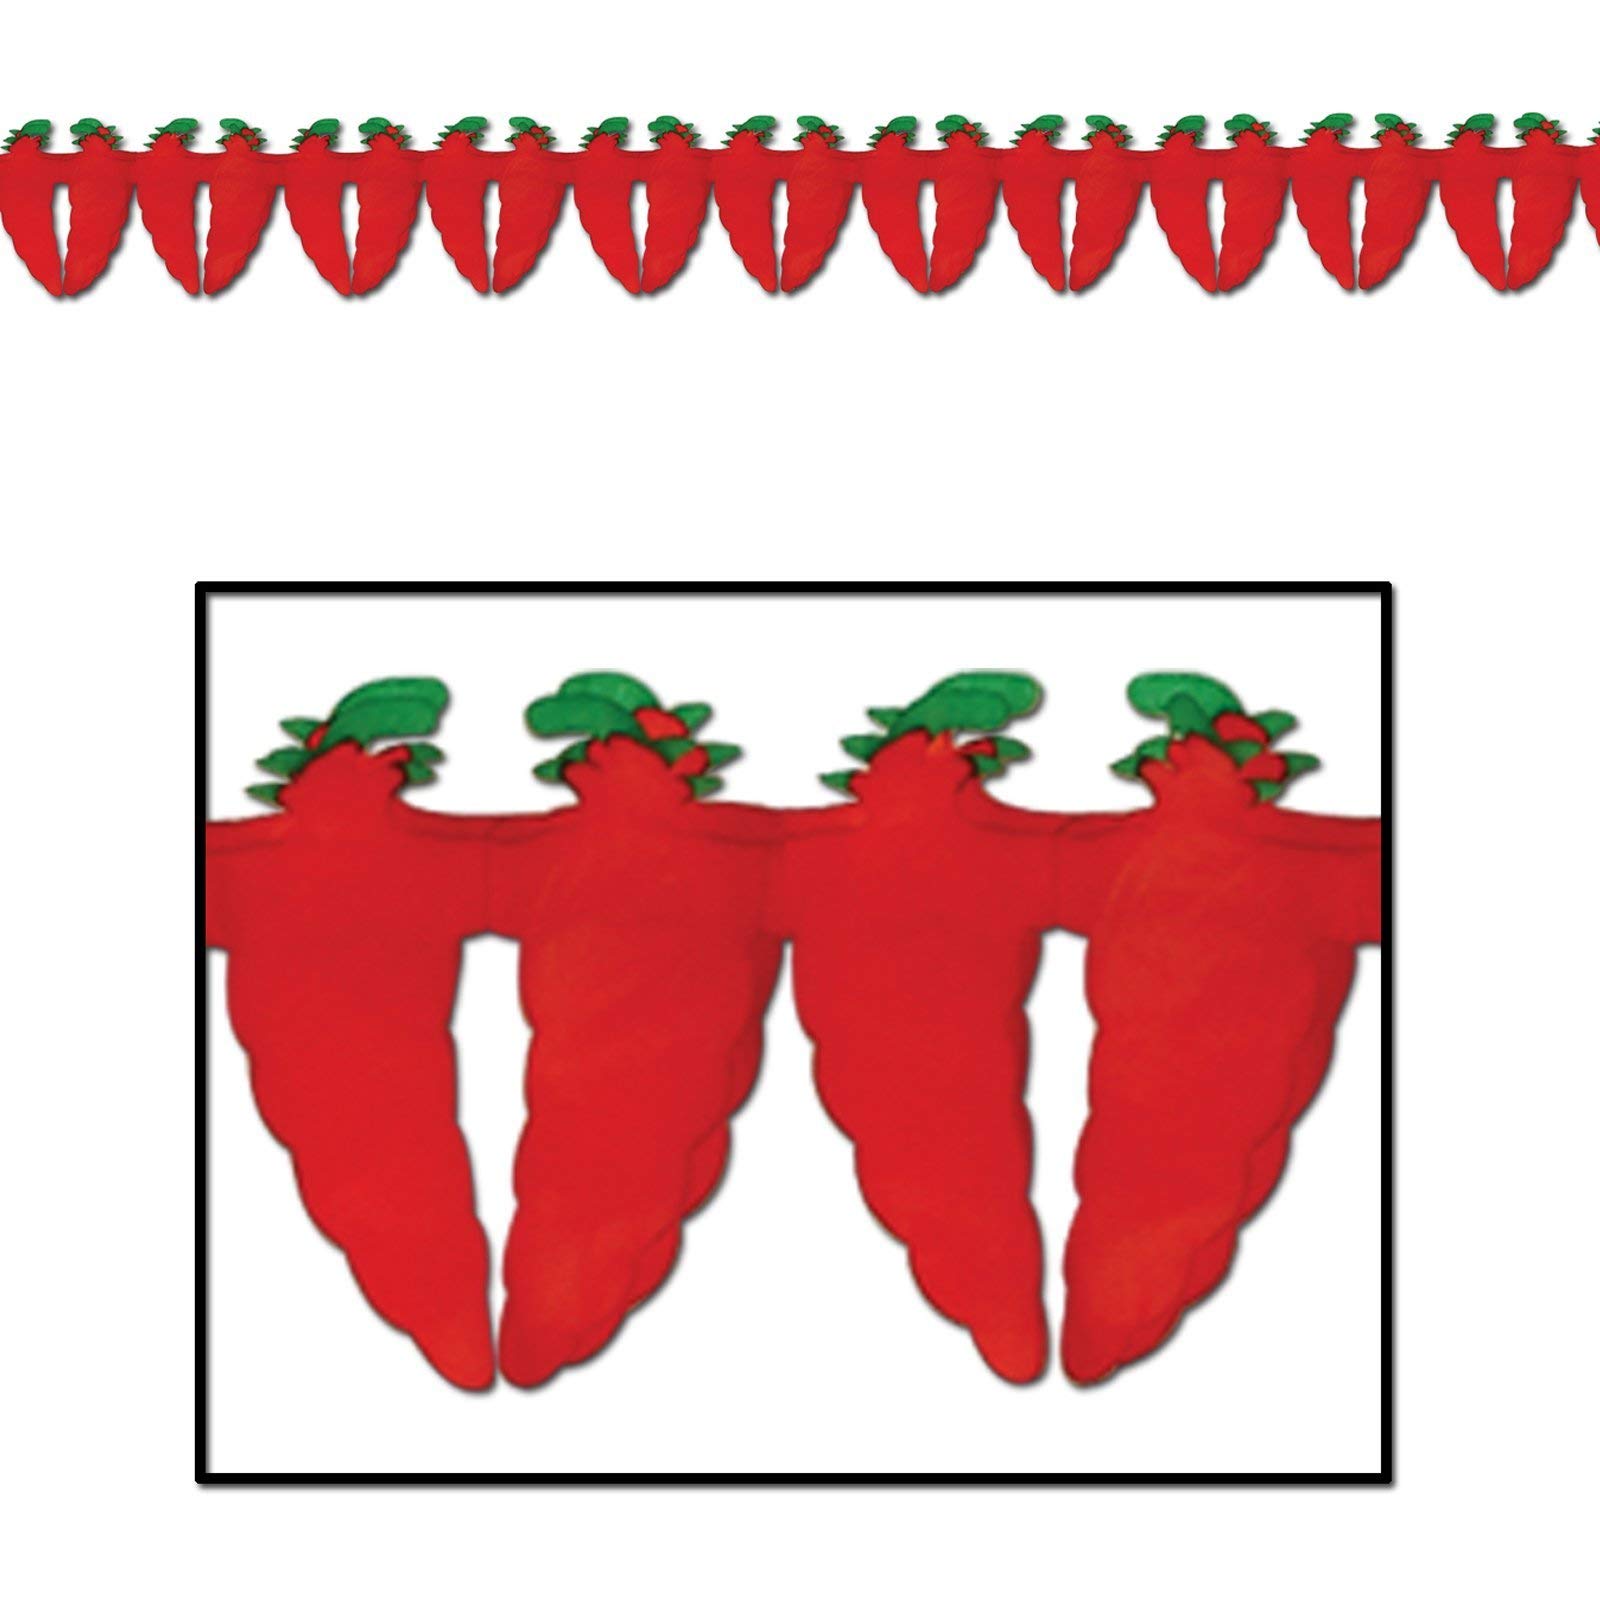 Chili Pepper Garland Party Accessory (1 count) (1/Pkg)